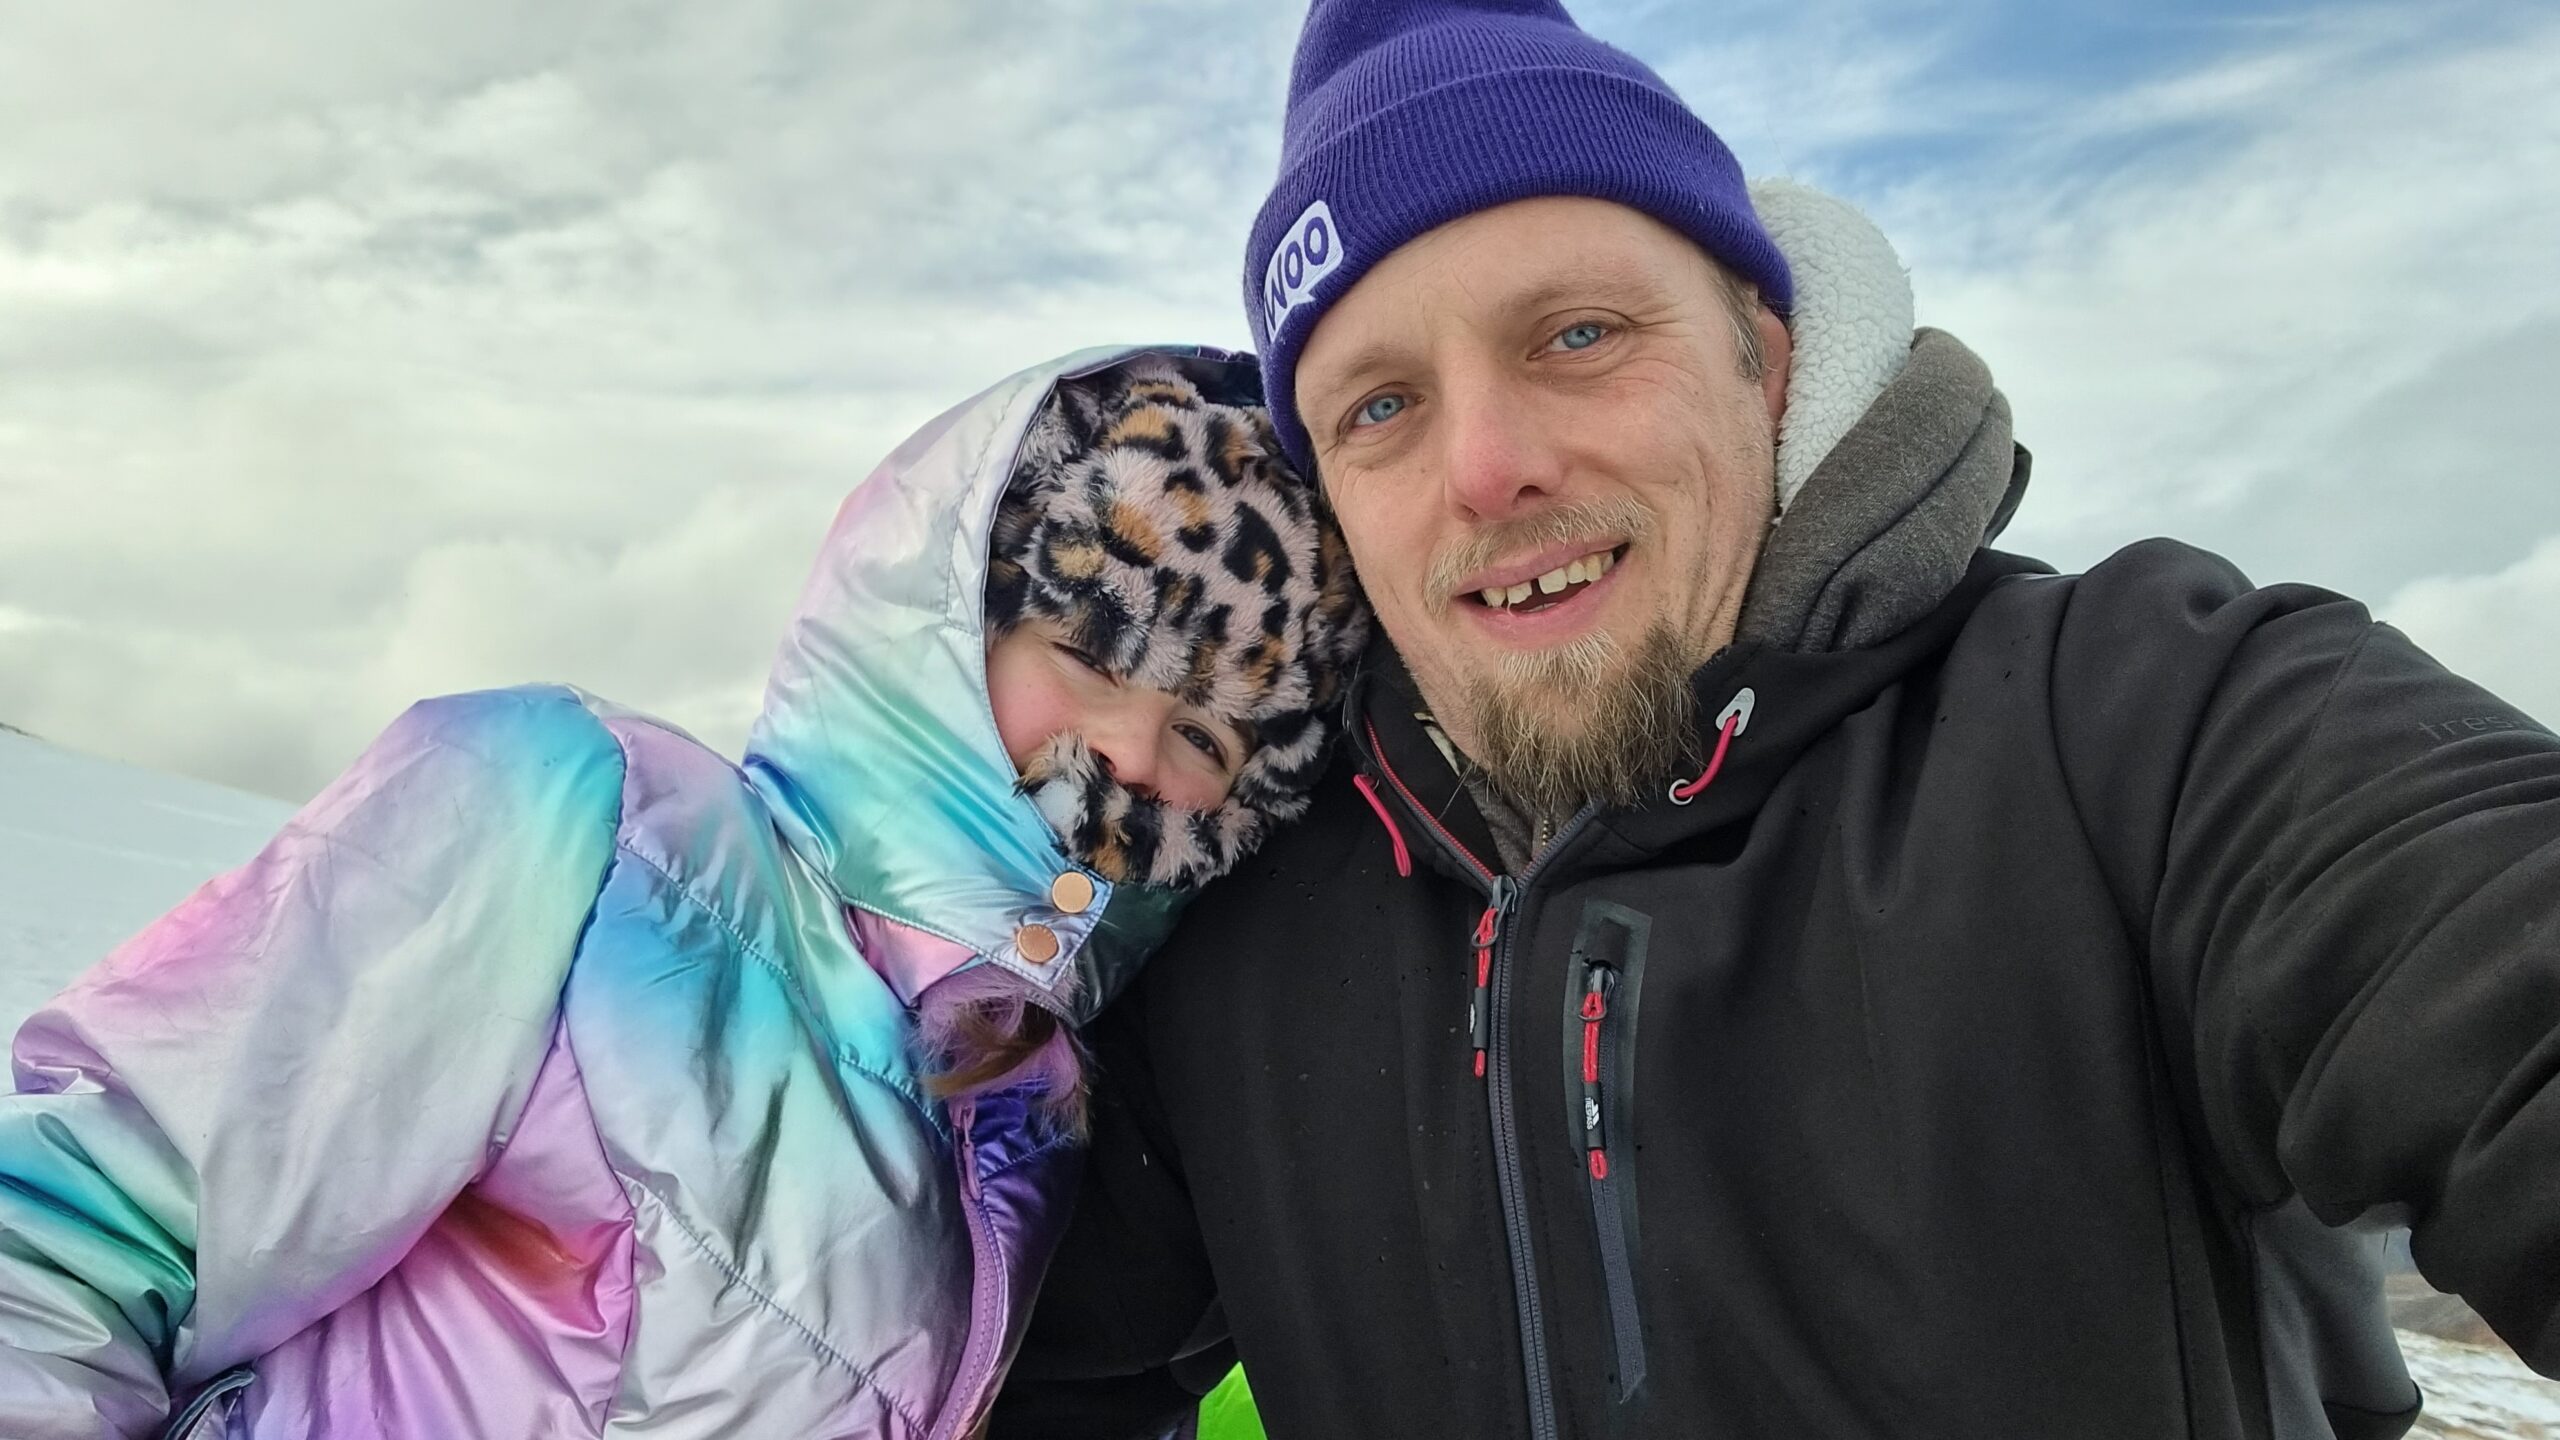 Dan, wearing a warm weatherproof black jacket and a purple "Woo" woolen hat, alongside a 9-year-old girl wrapped up in a faux-leapordskin hat and an iridescent coat, against a snowy hillside with rolling clouds.